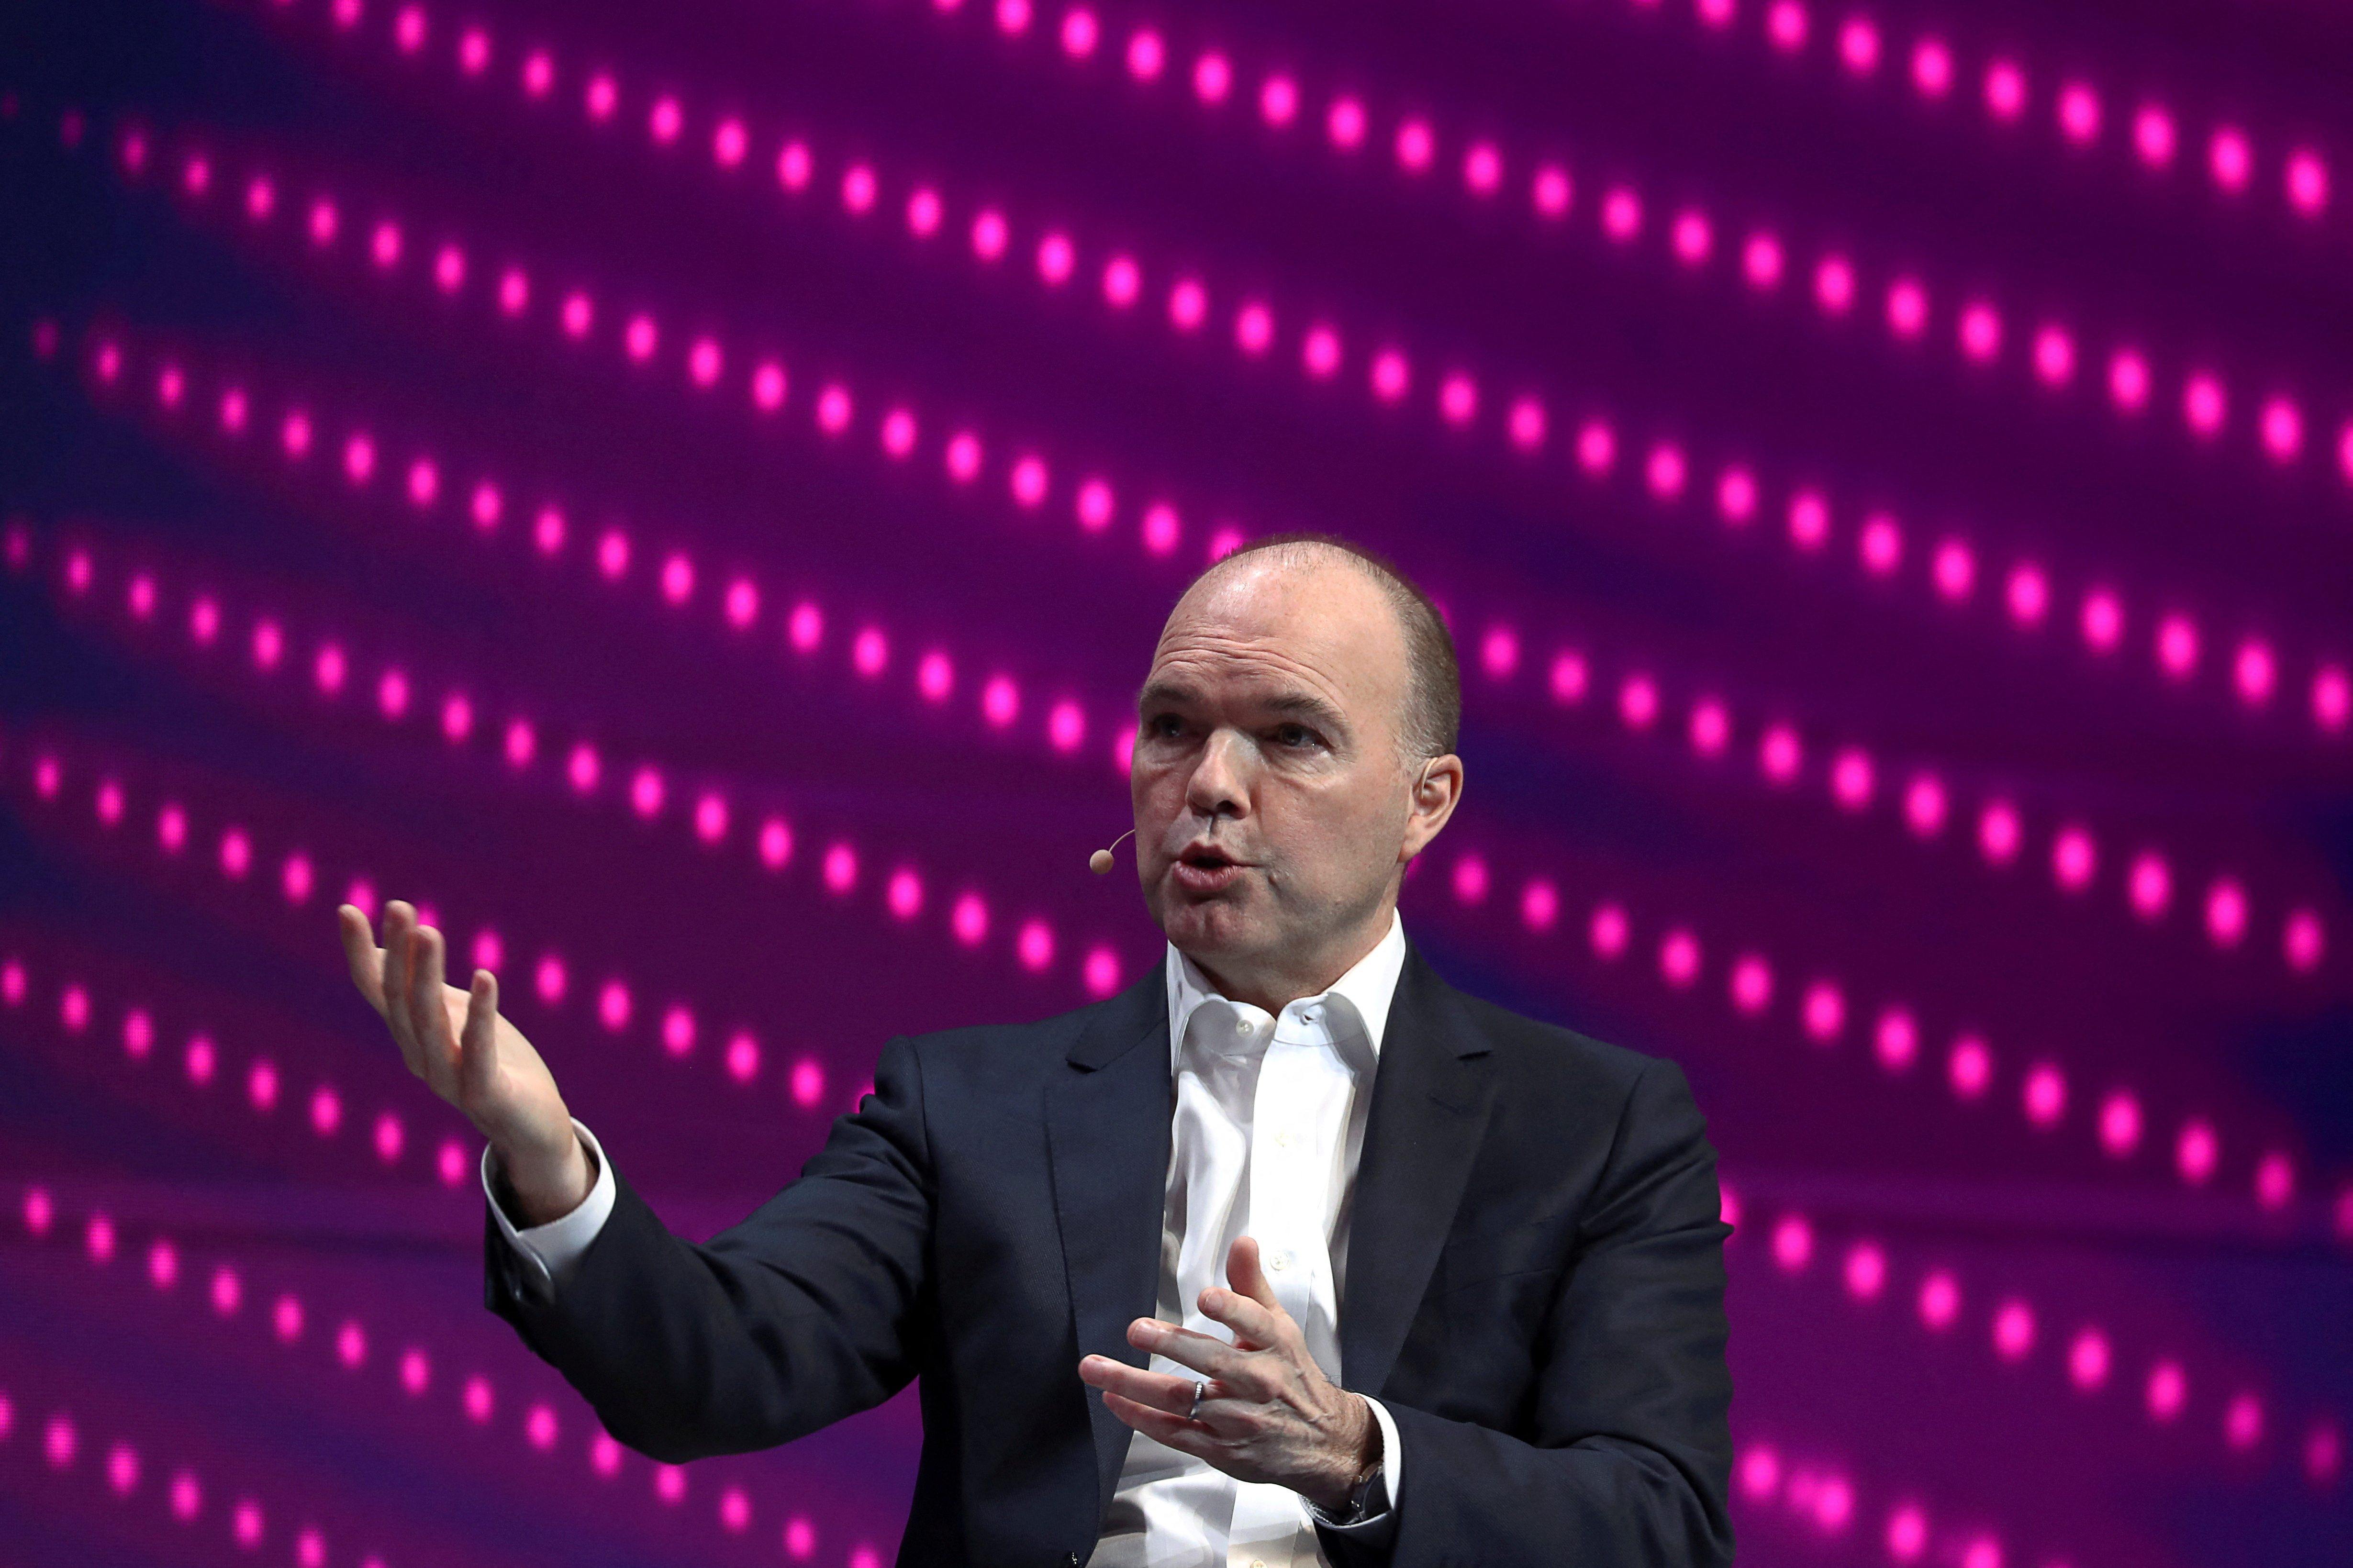 Nick Read, CEO of Vodafone, gestures as he speaks during the Mobile World Congress in Barcelona